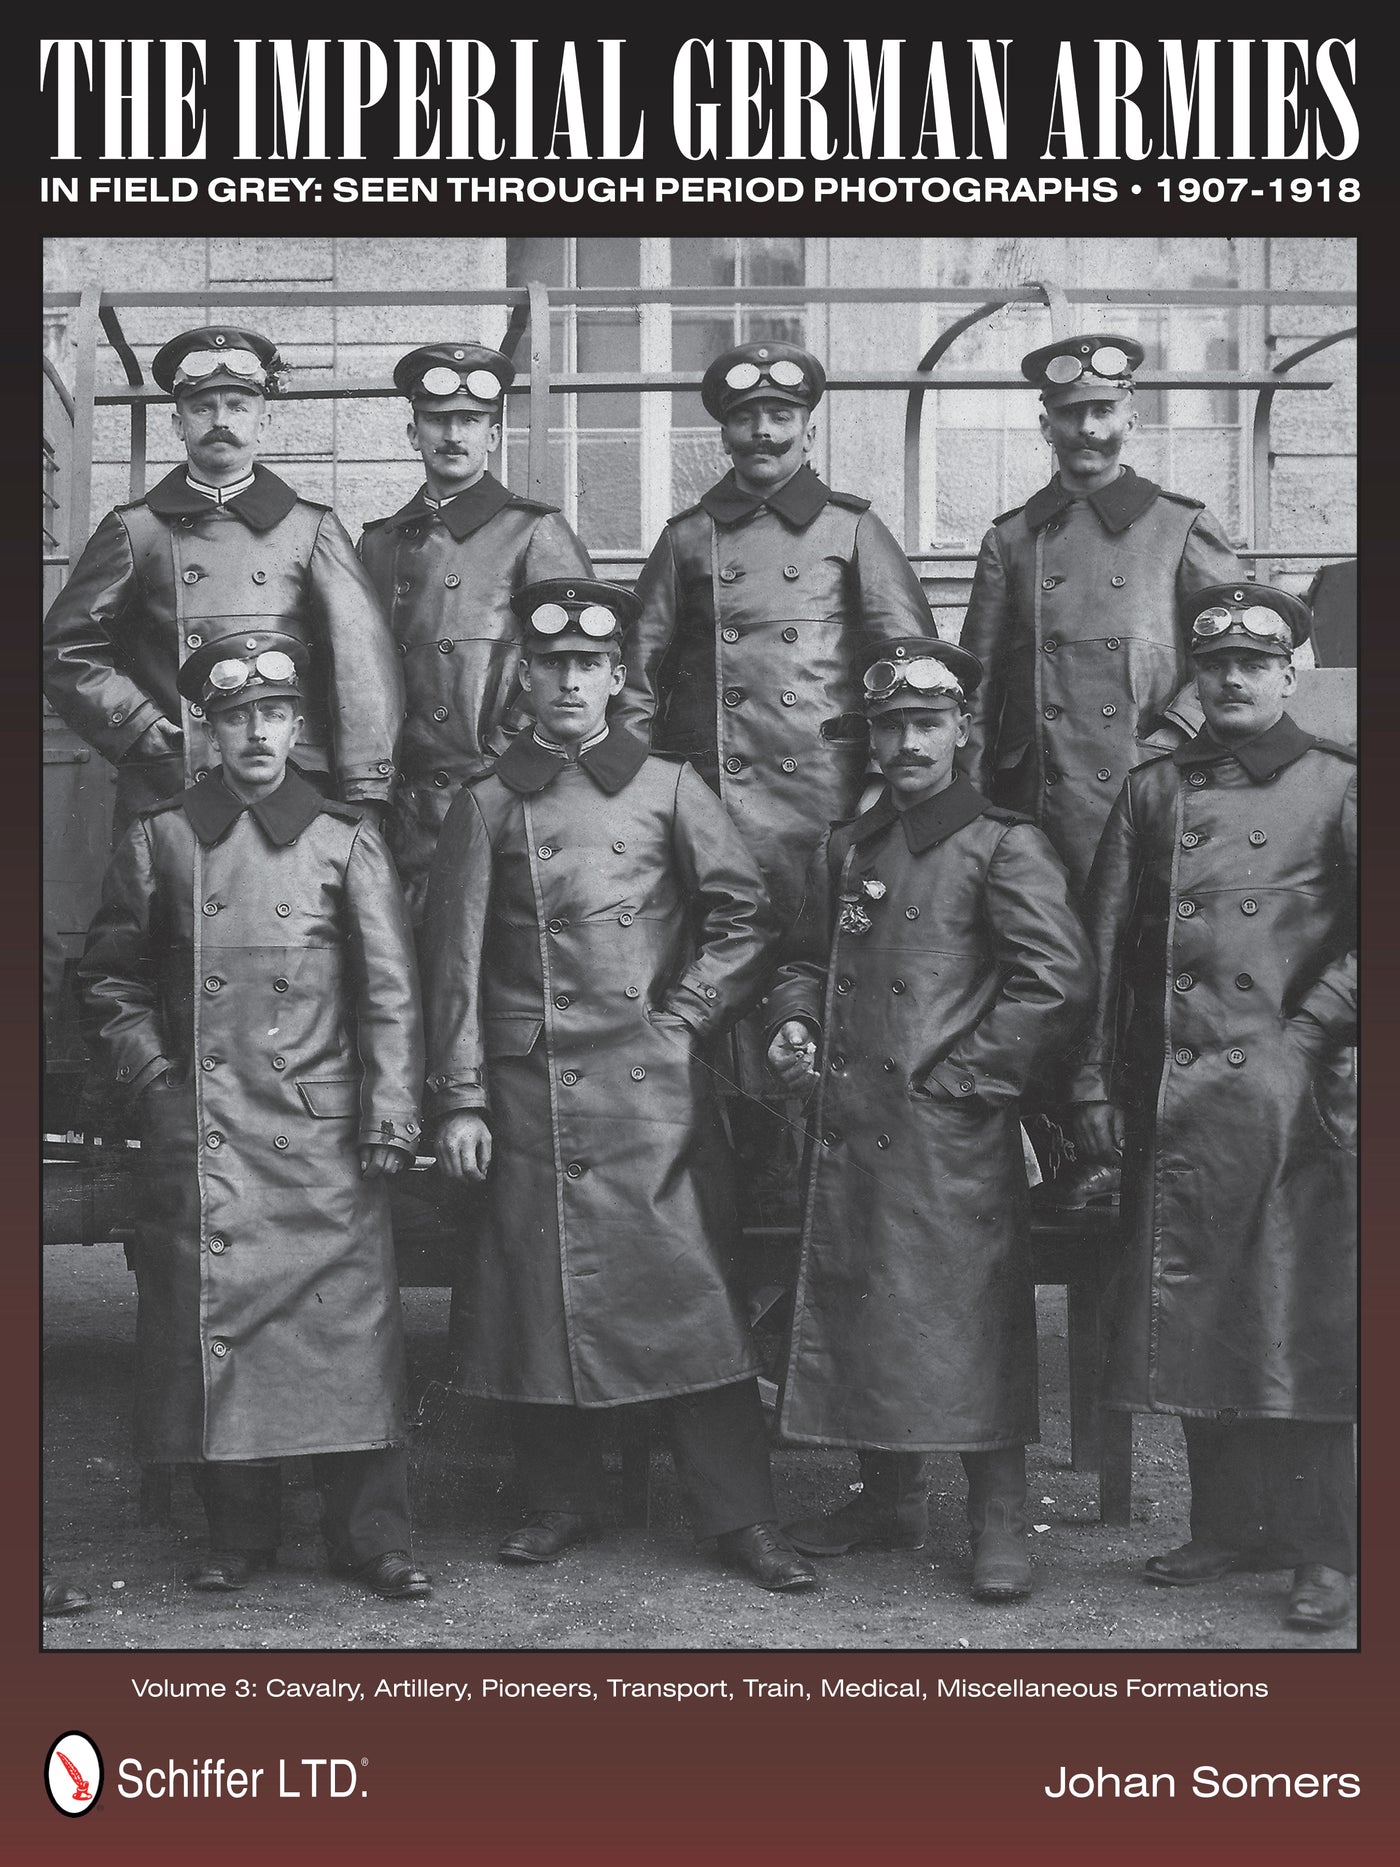 The Imperial German Armies in Field Grey Seen Through Period Photographs 1907-1918